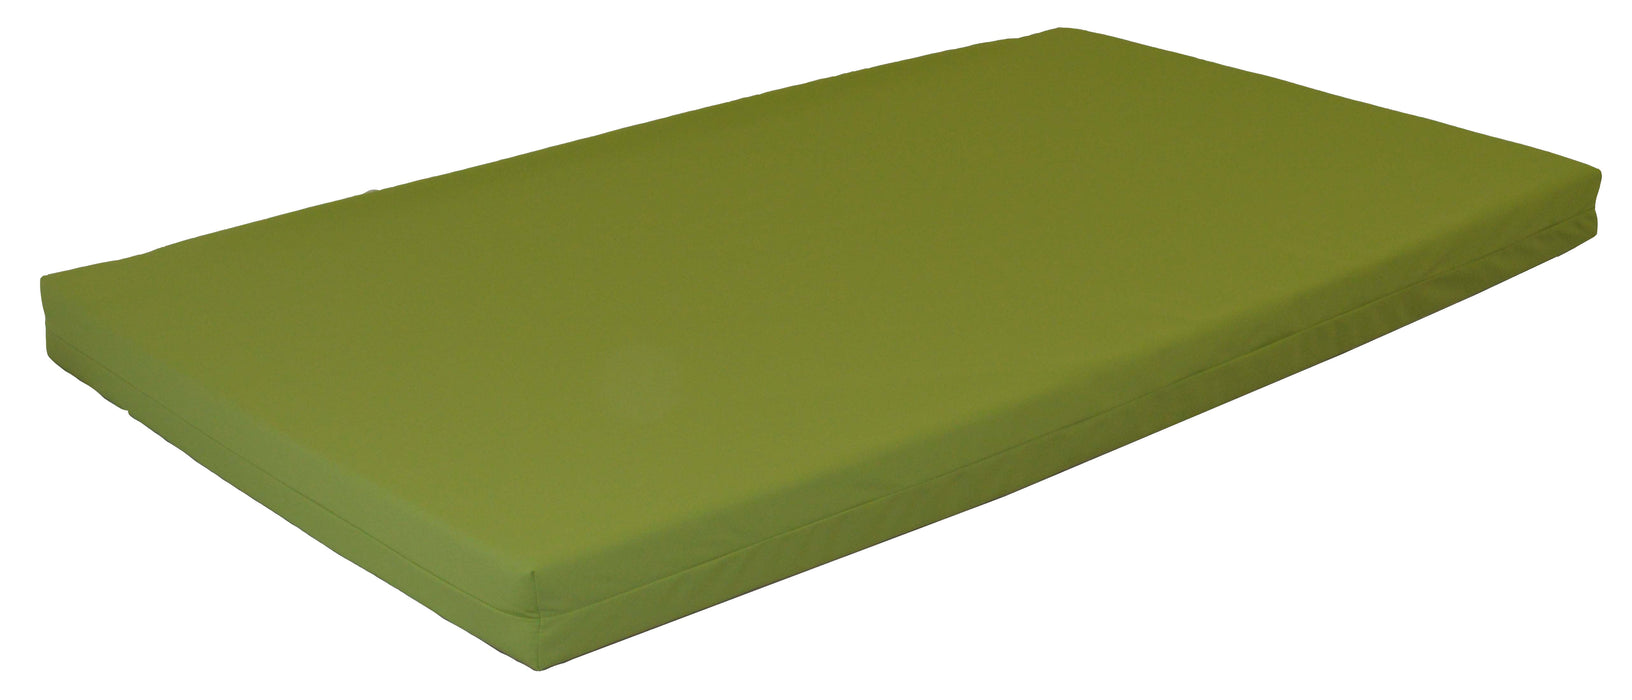 A&L Furniture Co. Weather-Resistant Acrylic Cushions for VersaLoft Daybeds